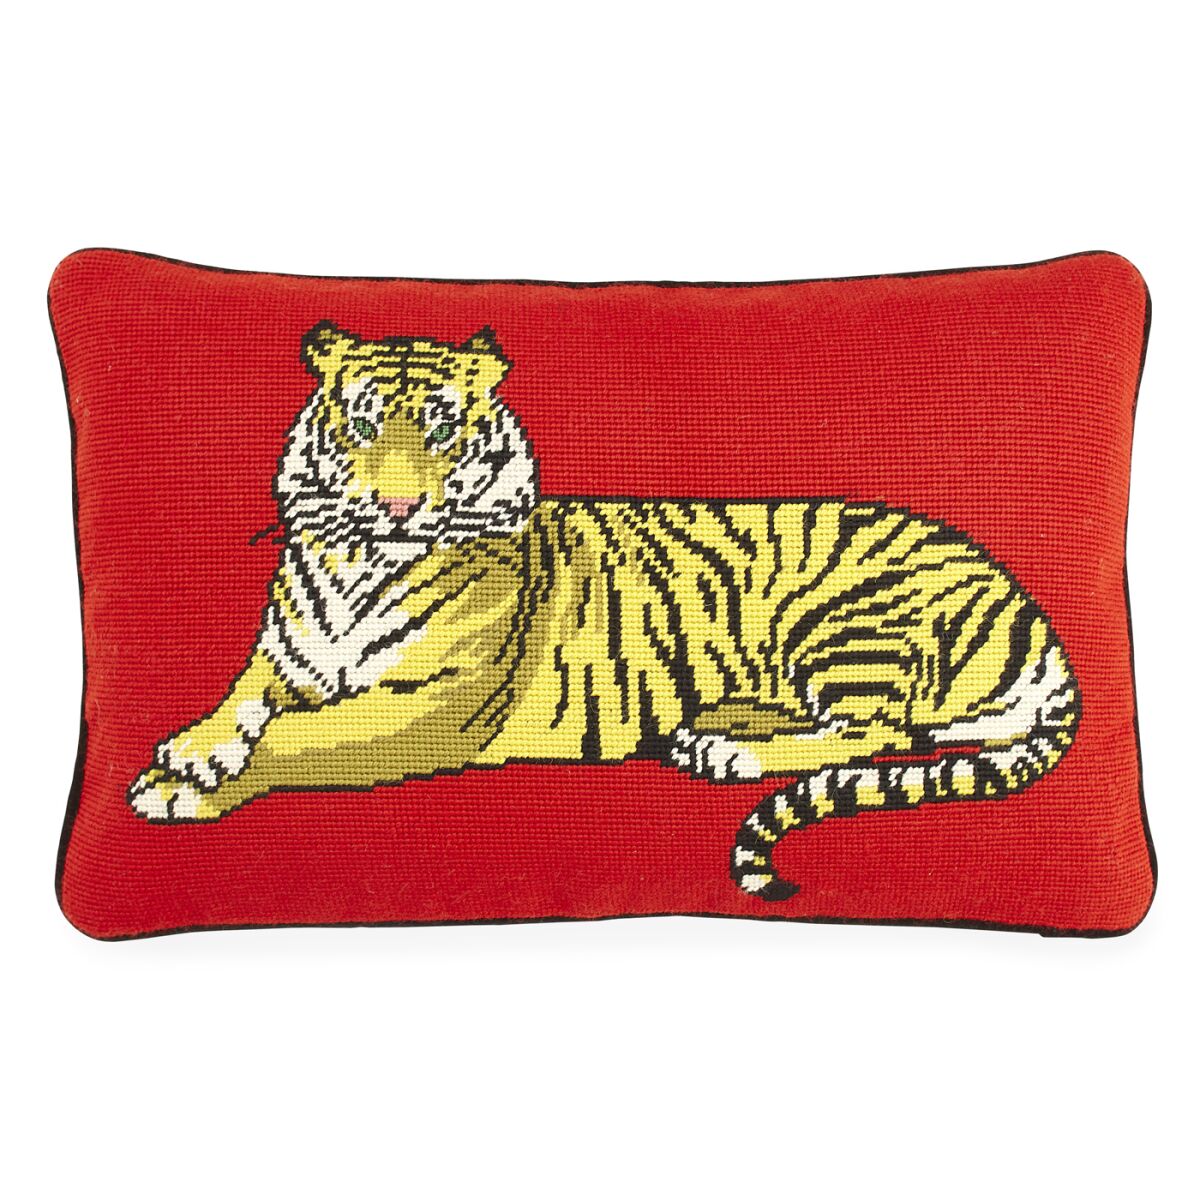 A red needlepoint pillow with a tiger design